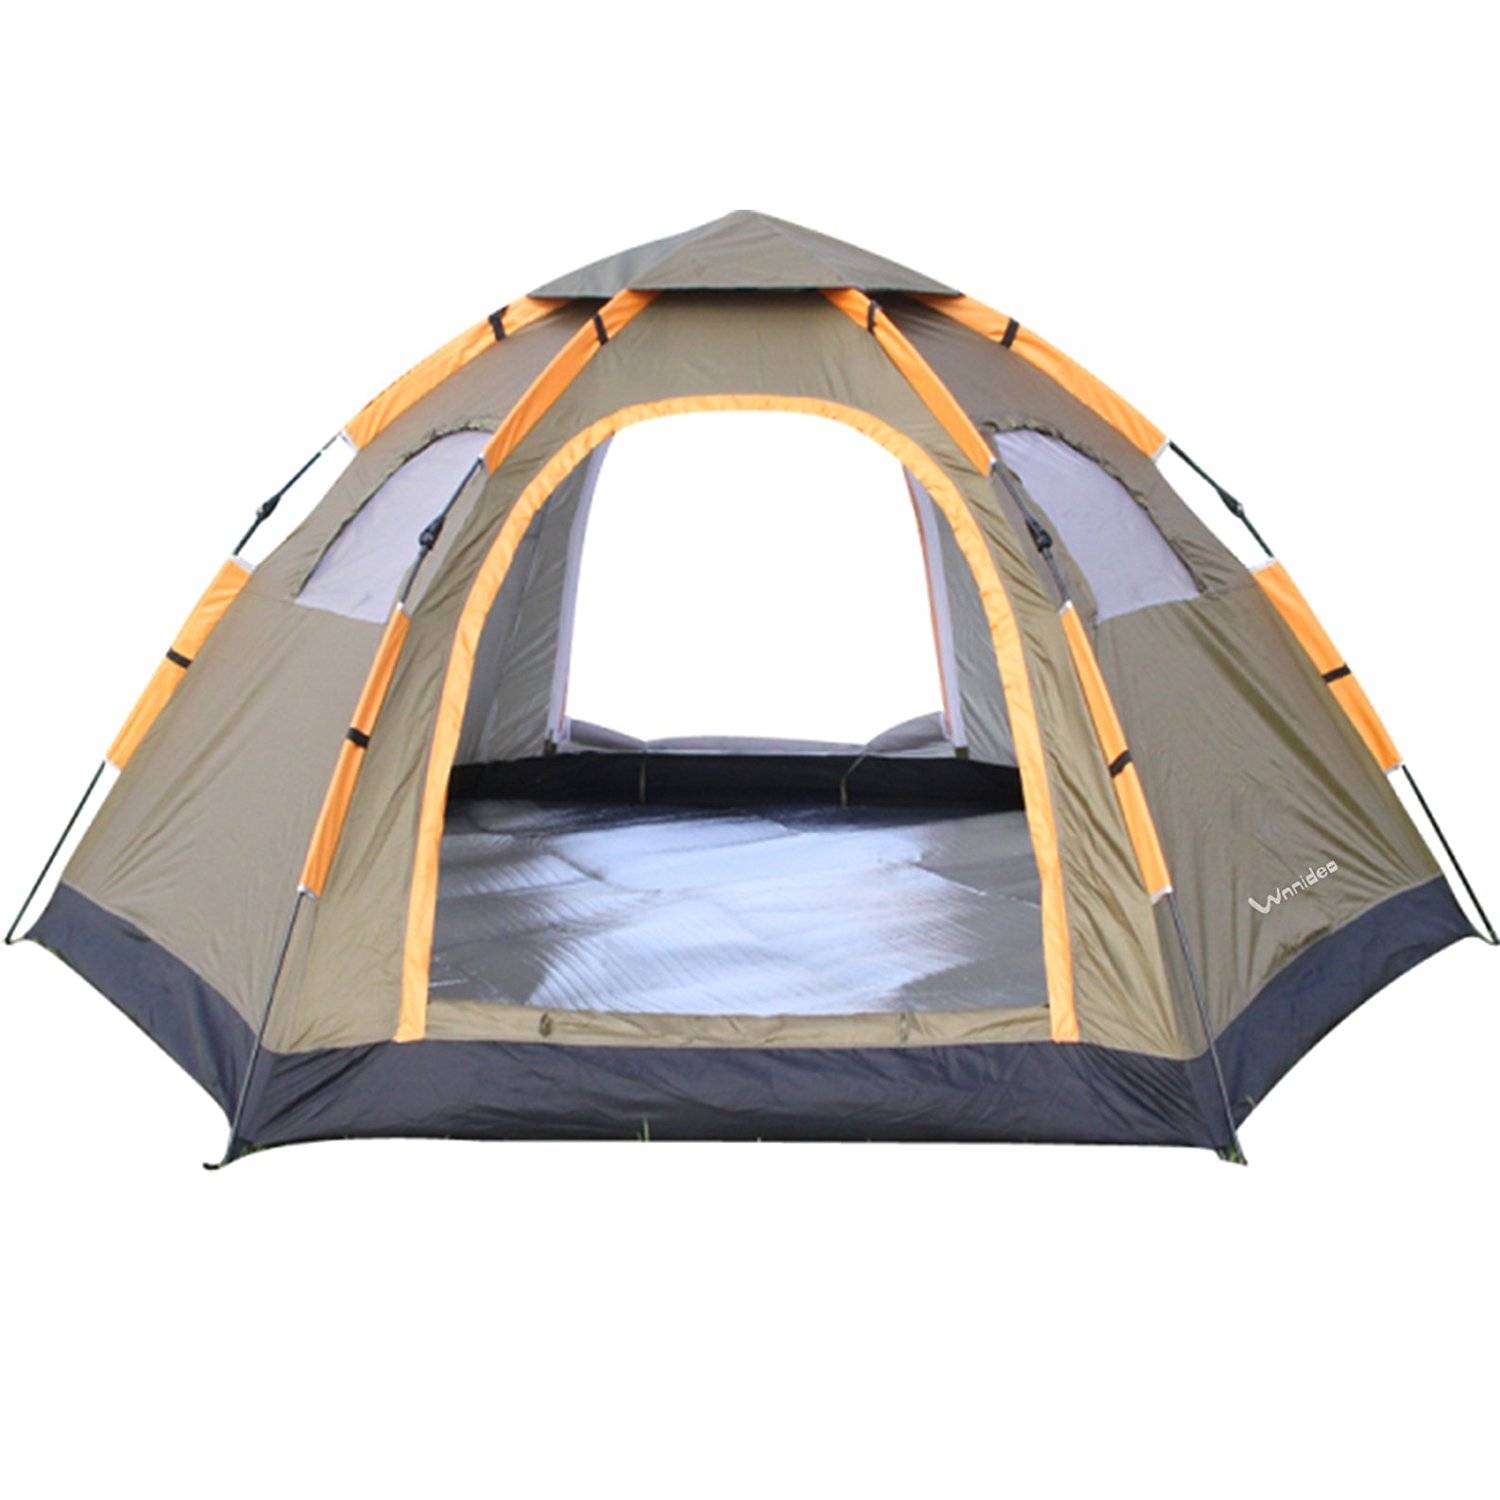 Wnnideo Instant 6 Person Family Automatic Pop Up Tent